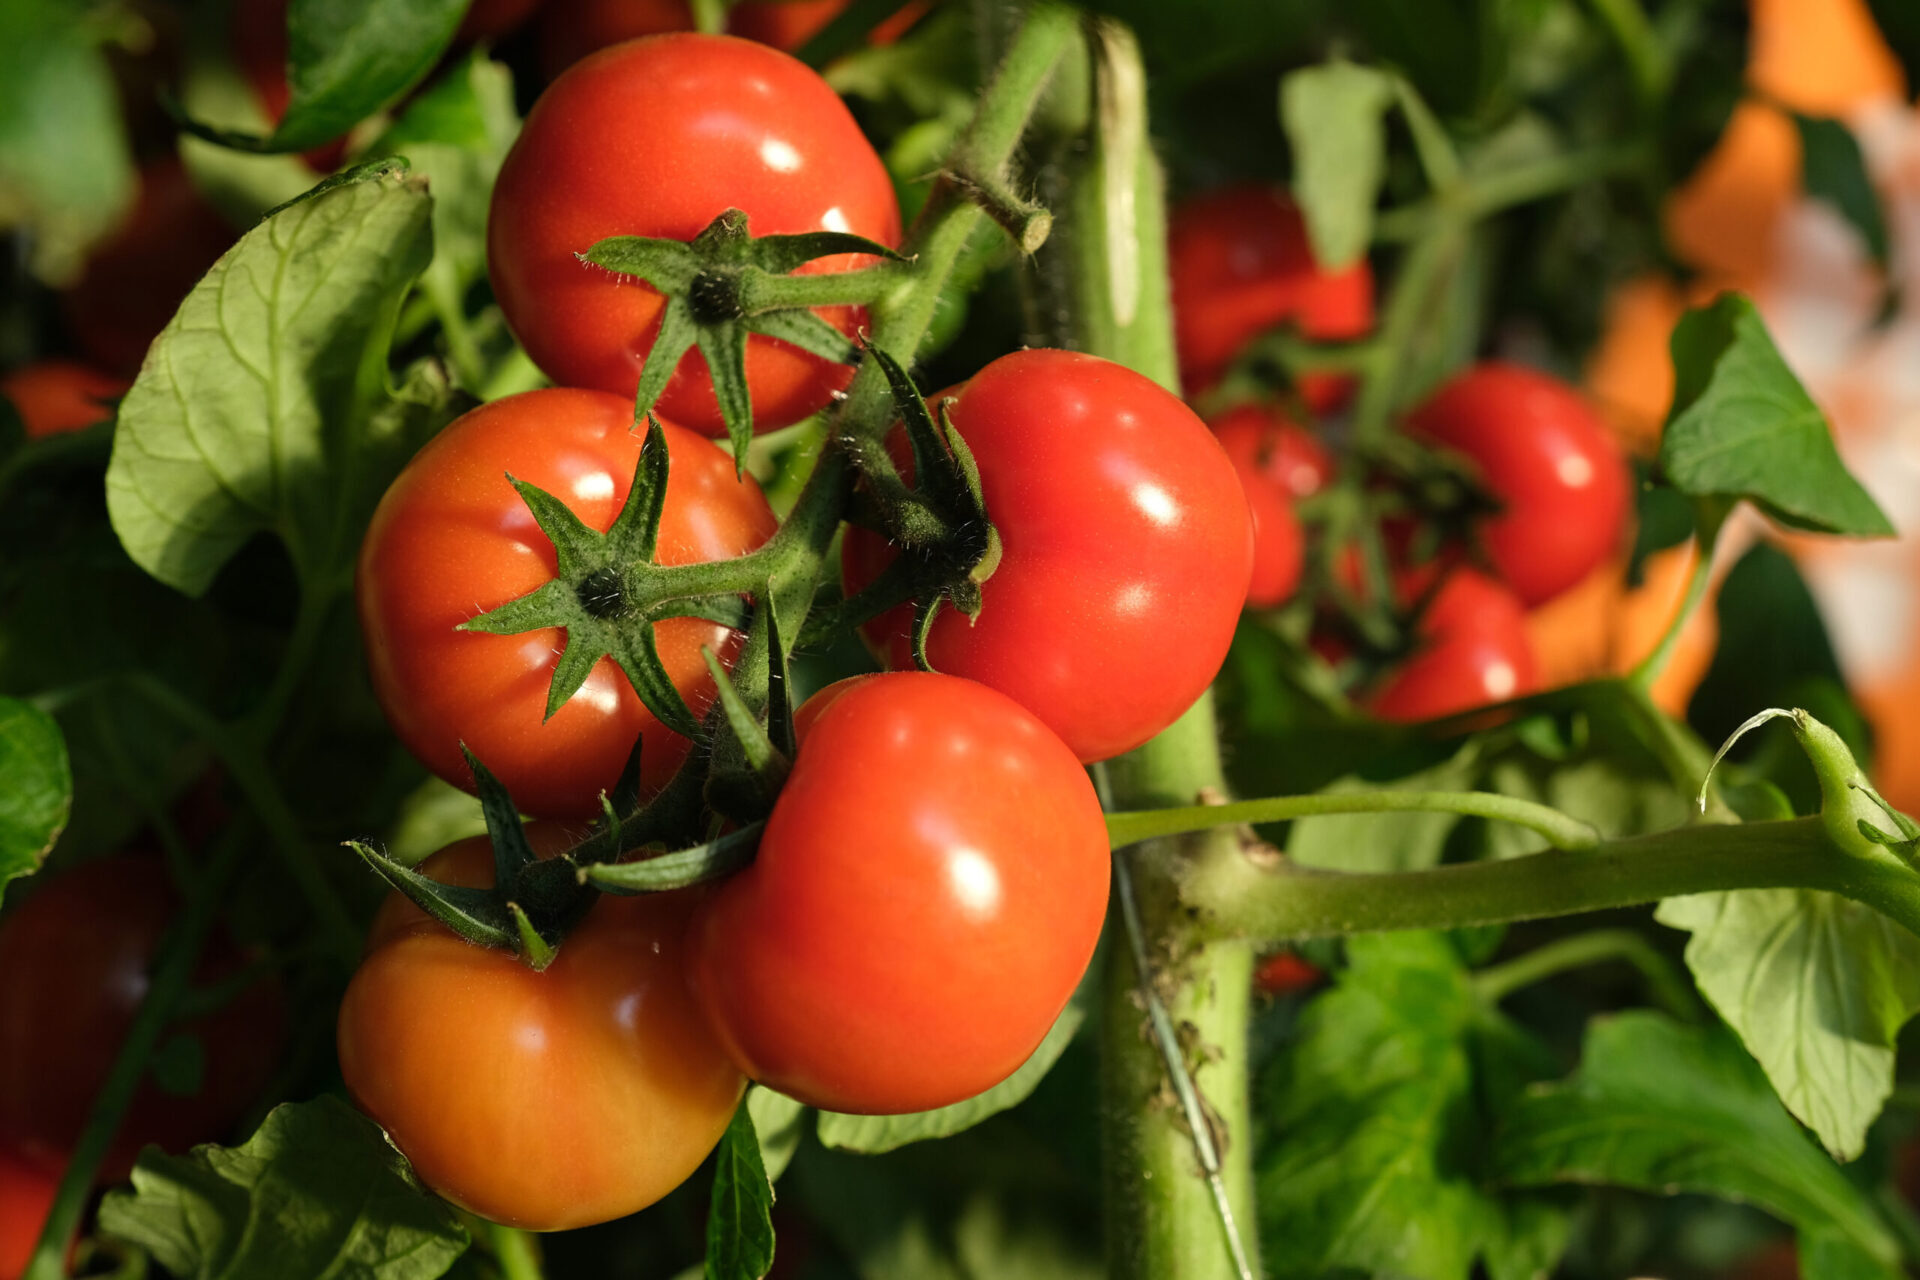 Although it’s common to come across problems while growing tomatoes, for the most part it’s rel...